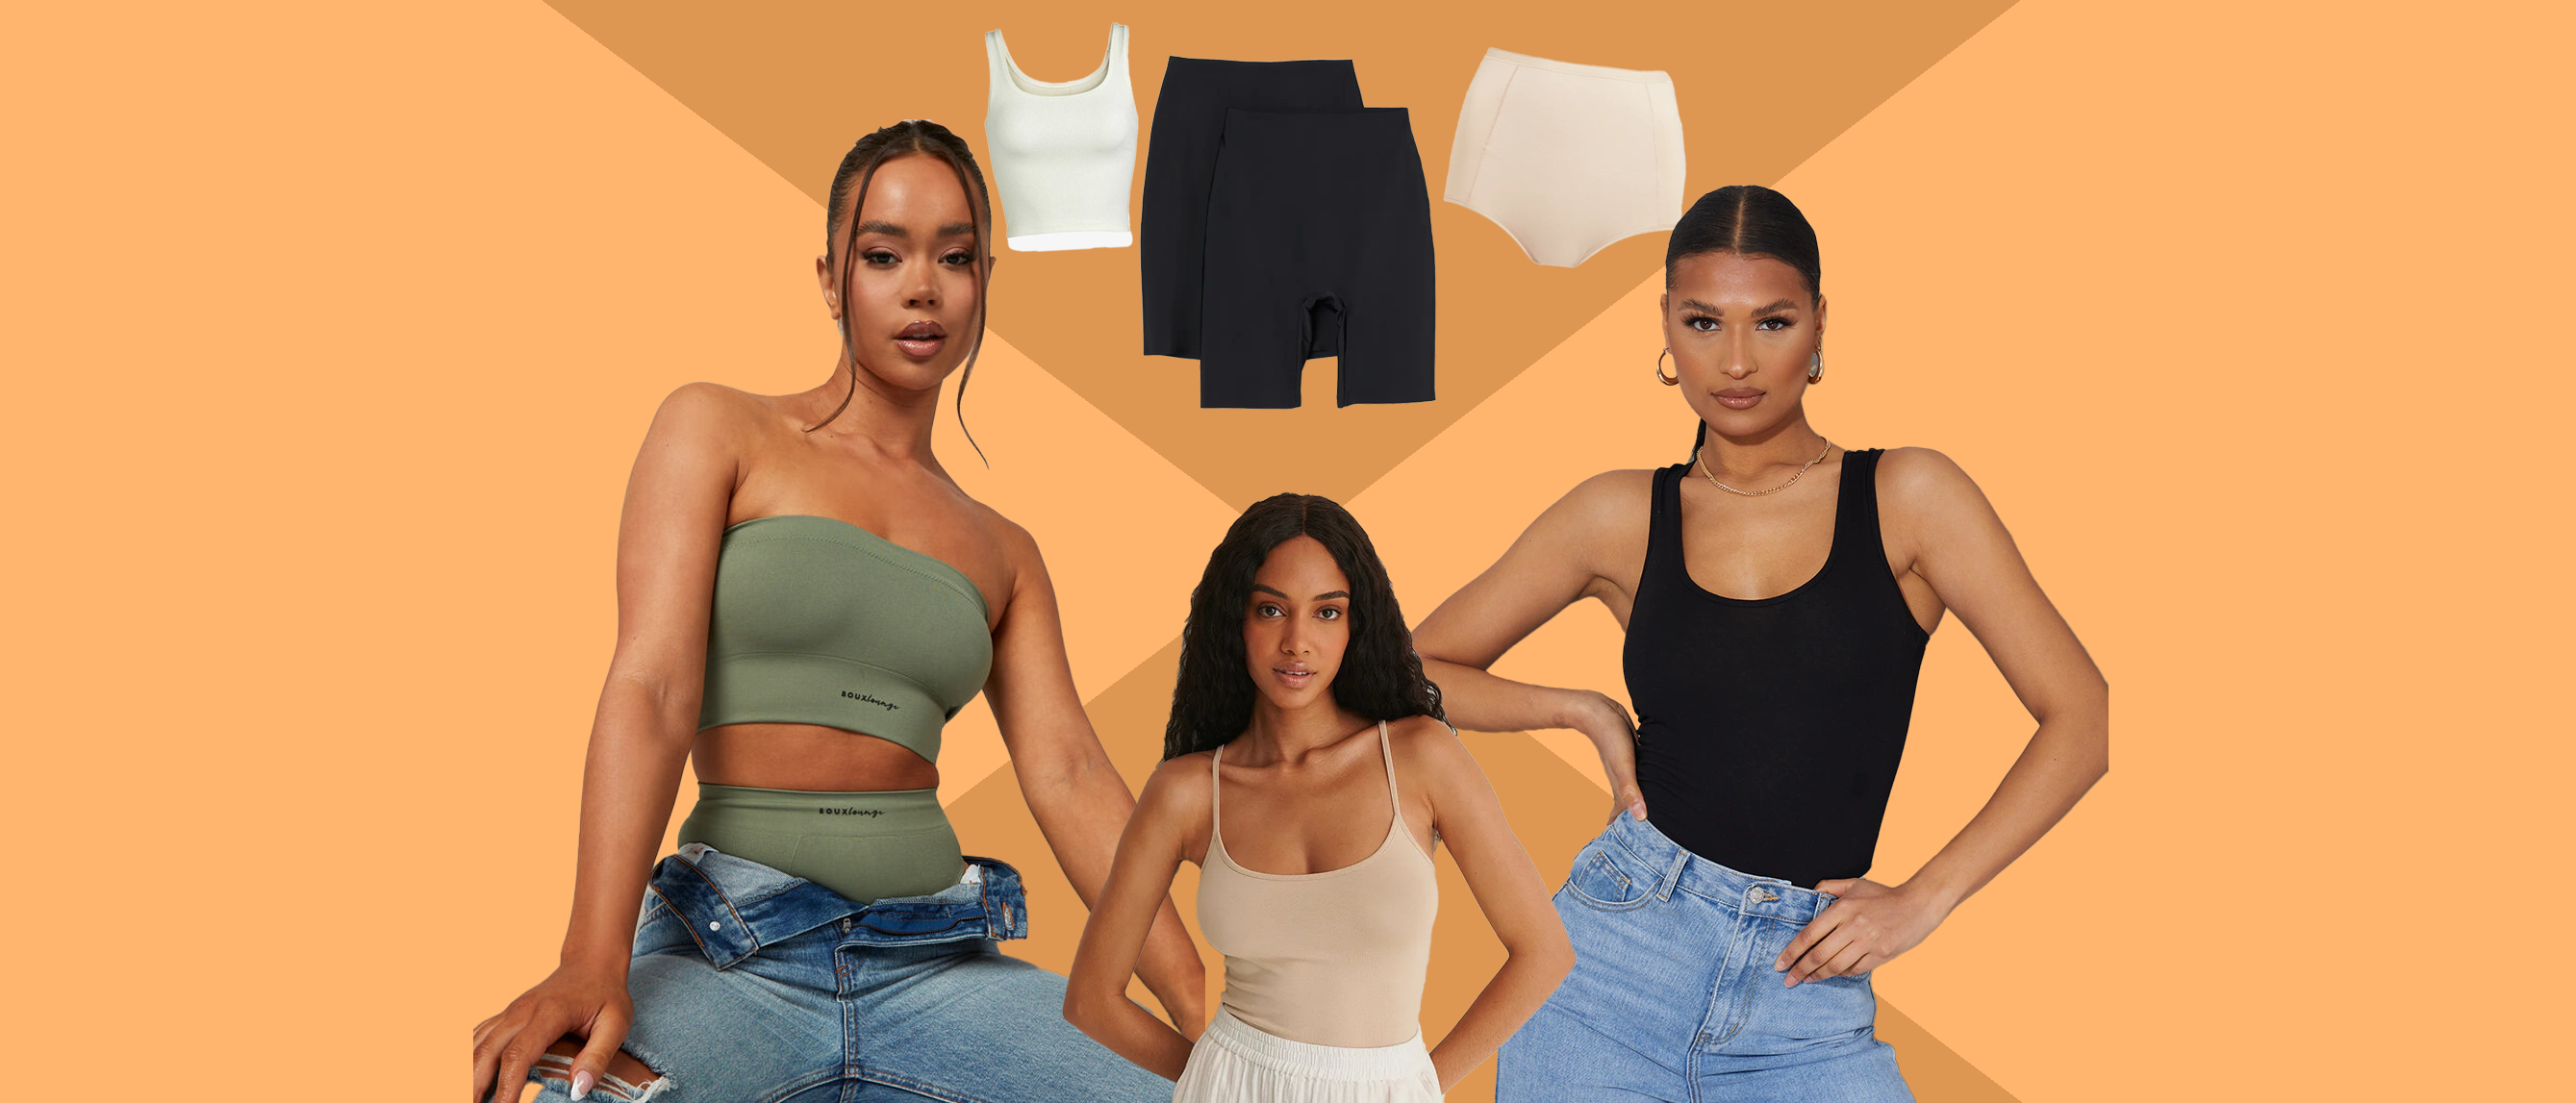 The BEST Shapewear? Let's talk about my favorite SKIMS Pieces